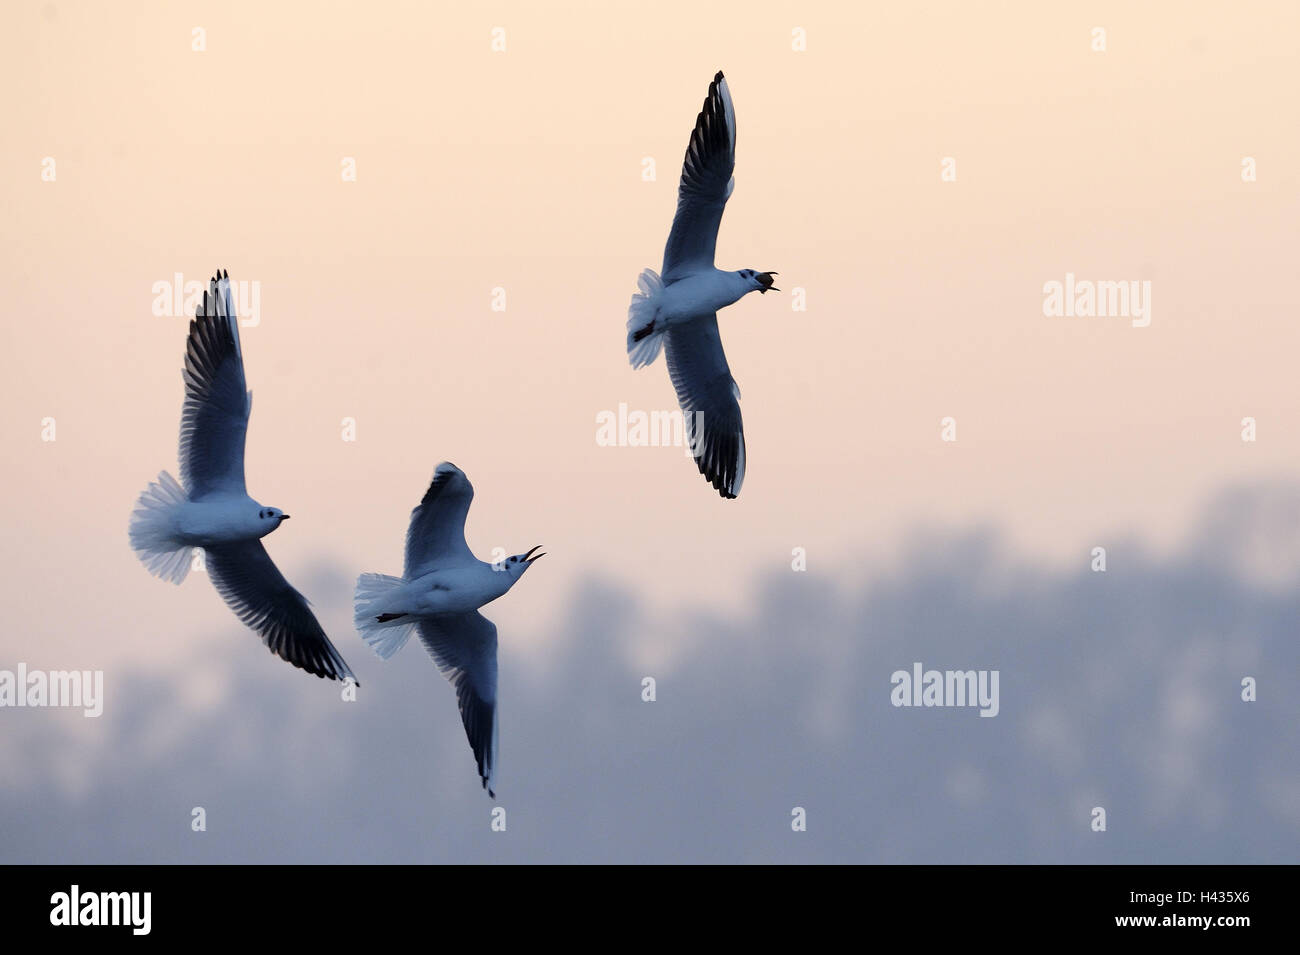 Black-headed gulls, Larus ridibundus, three, fly, hunt, food, nature, animals, birds, gulls, wings, stretched out, flapping of wings, flight, blur, whole body, envy, jealousy, evening light, Stock Photo